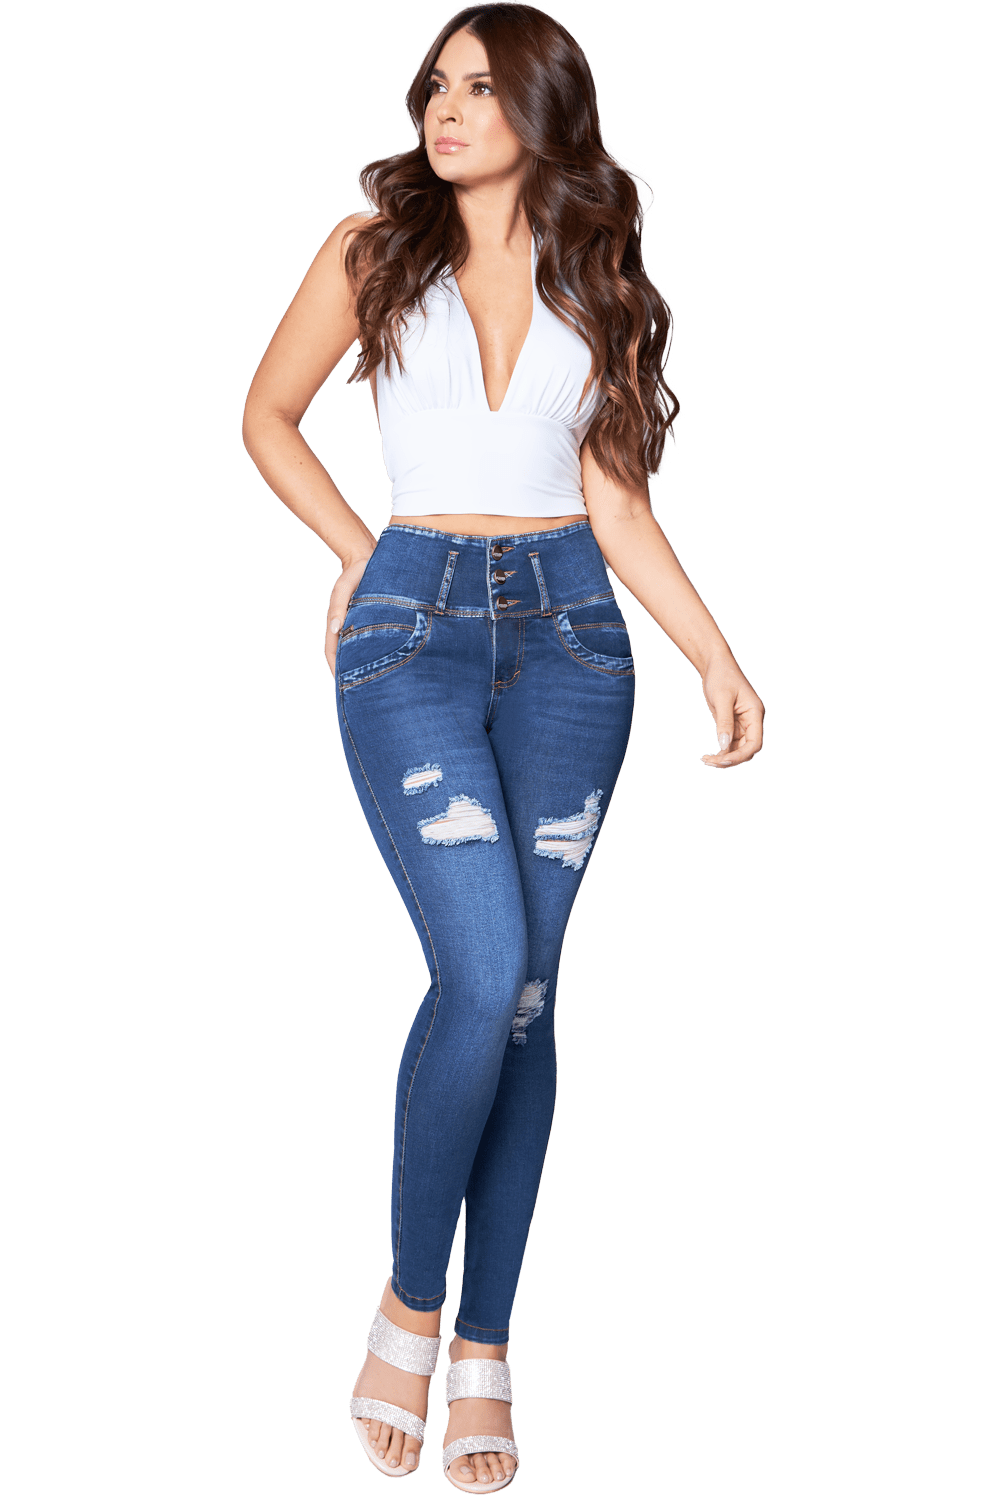 Ily Clothing Colombian Jean